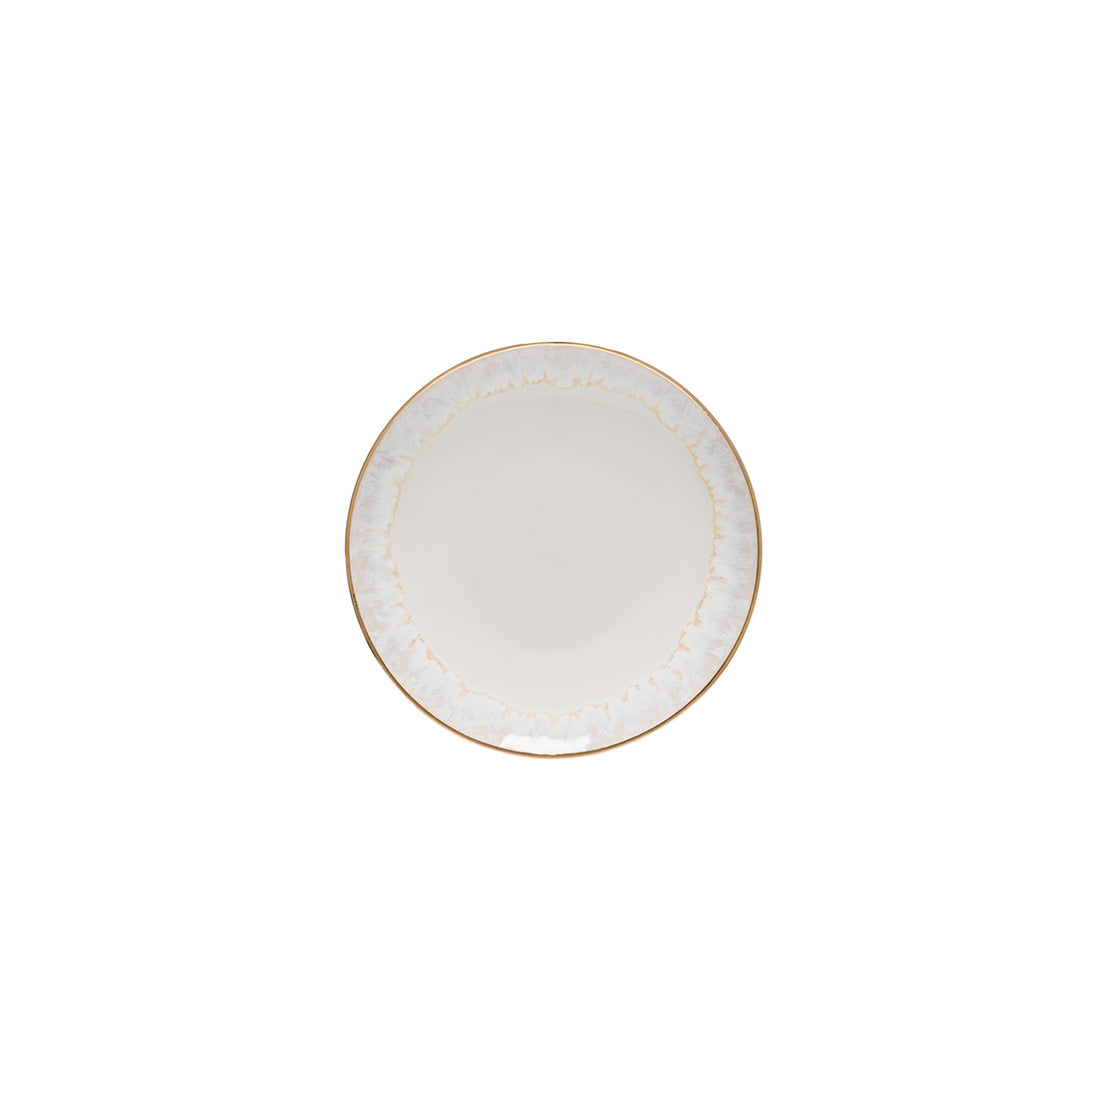 Casafina Taormina White And Gold Bread Plate